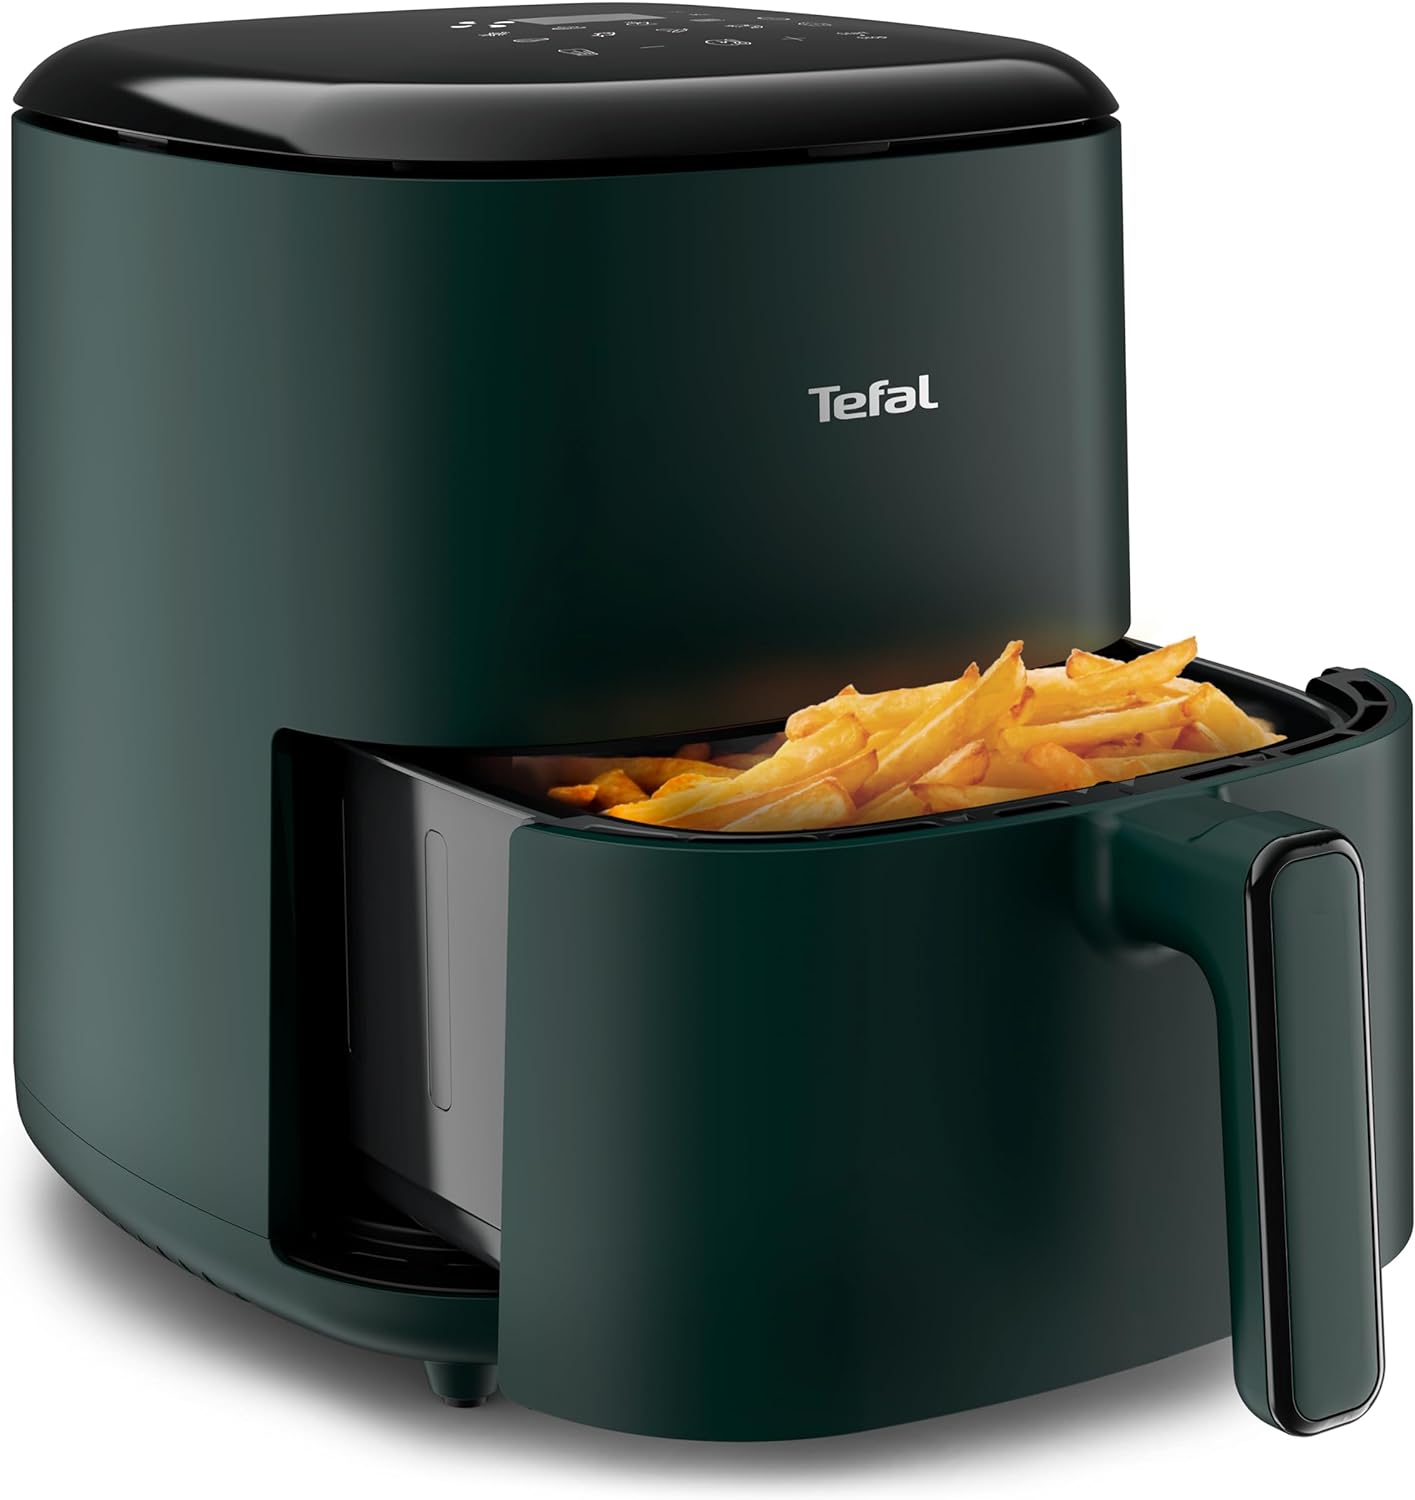 Tefal EY2453 Easy Fry Max 5L Hot Air Fryer Forest for up to 6 People, Healthy and Delicious Meals, Saves Time and Energy, Digital Control Panel, 10 Automatic Cooking Programmes